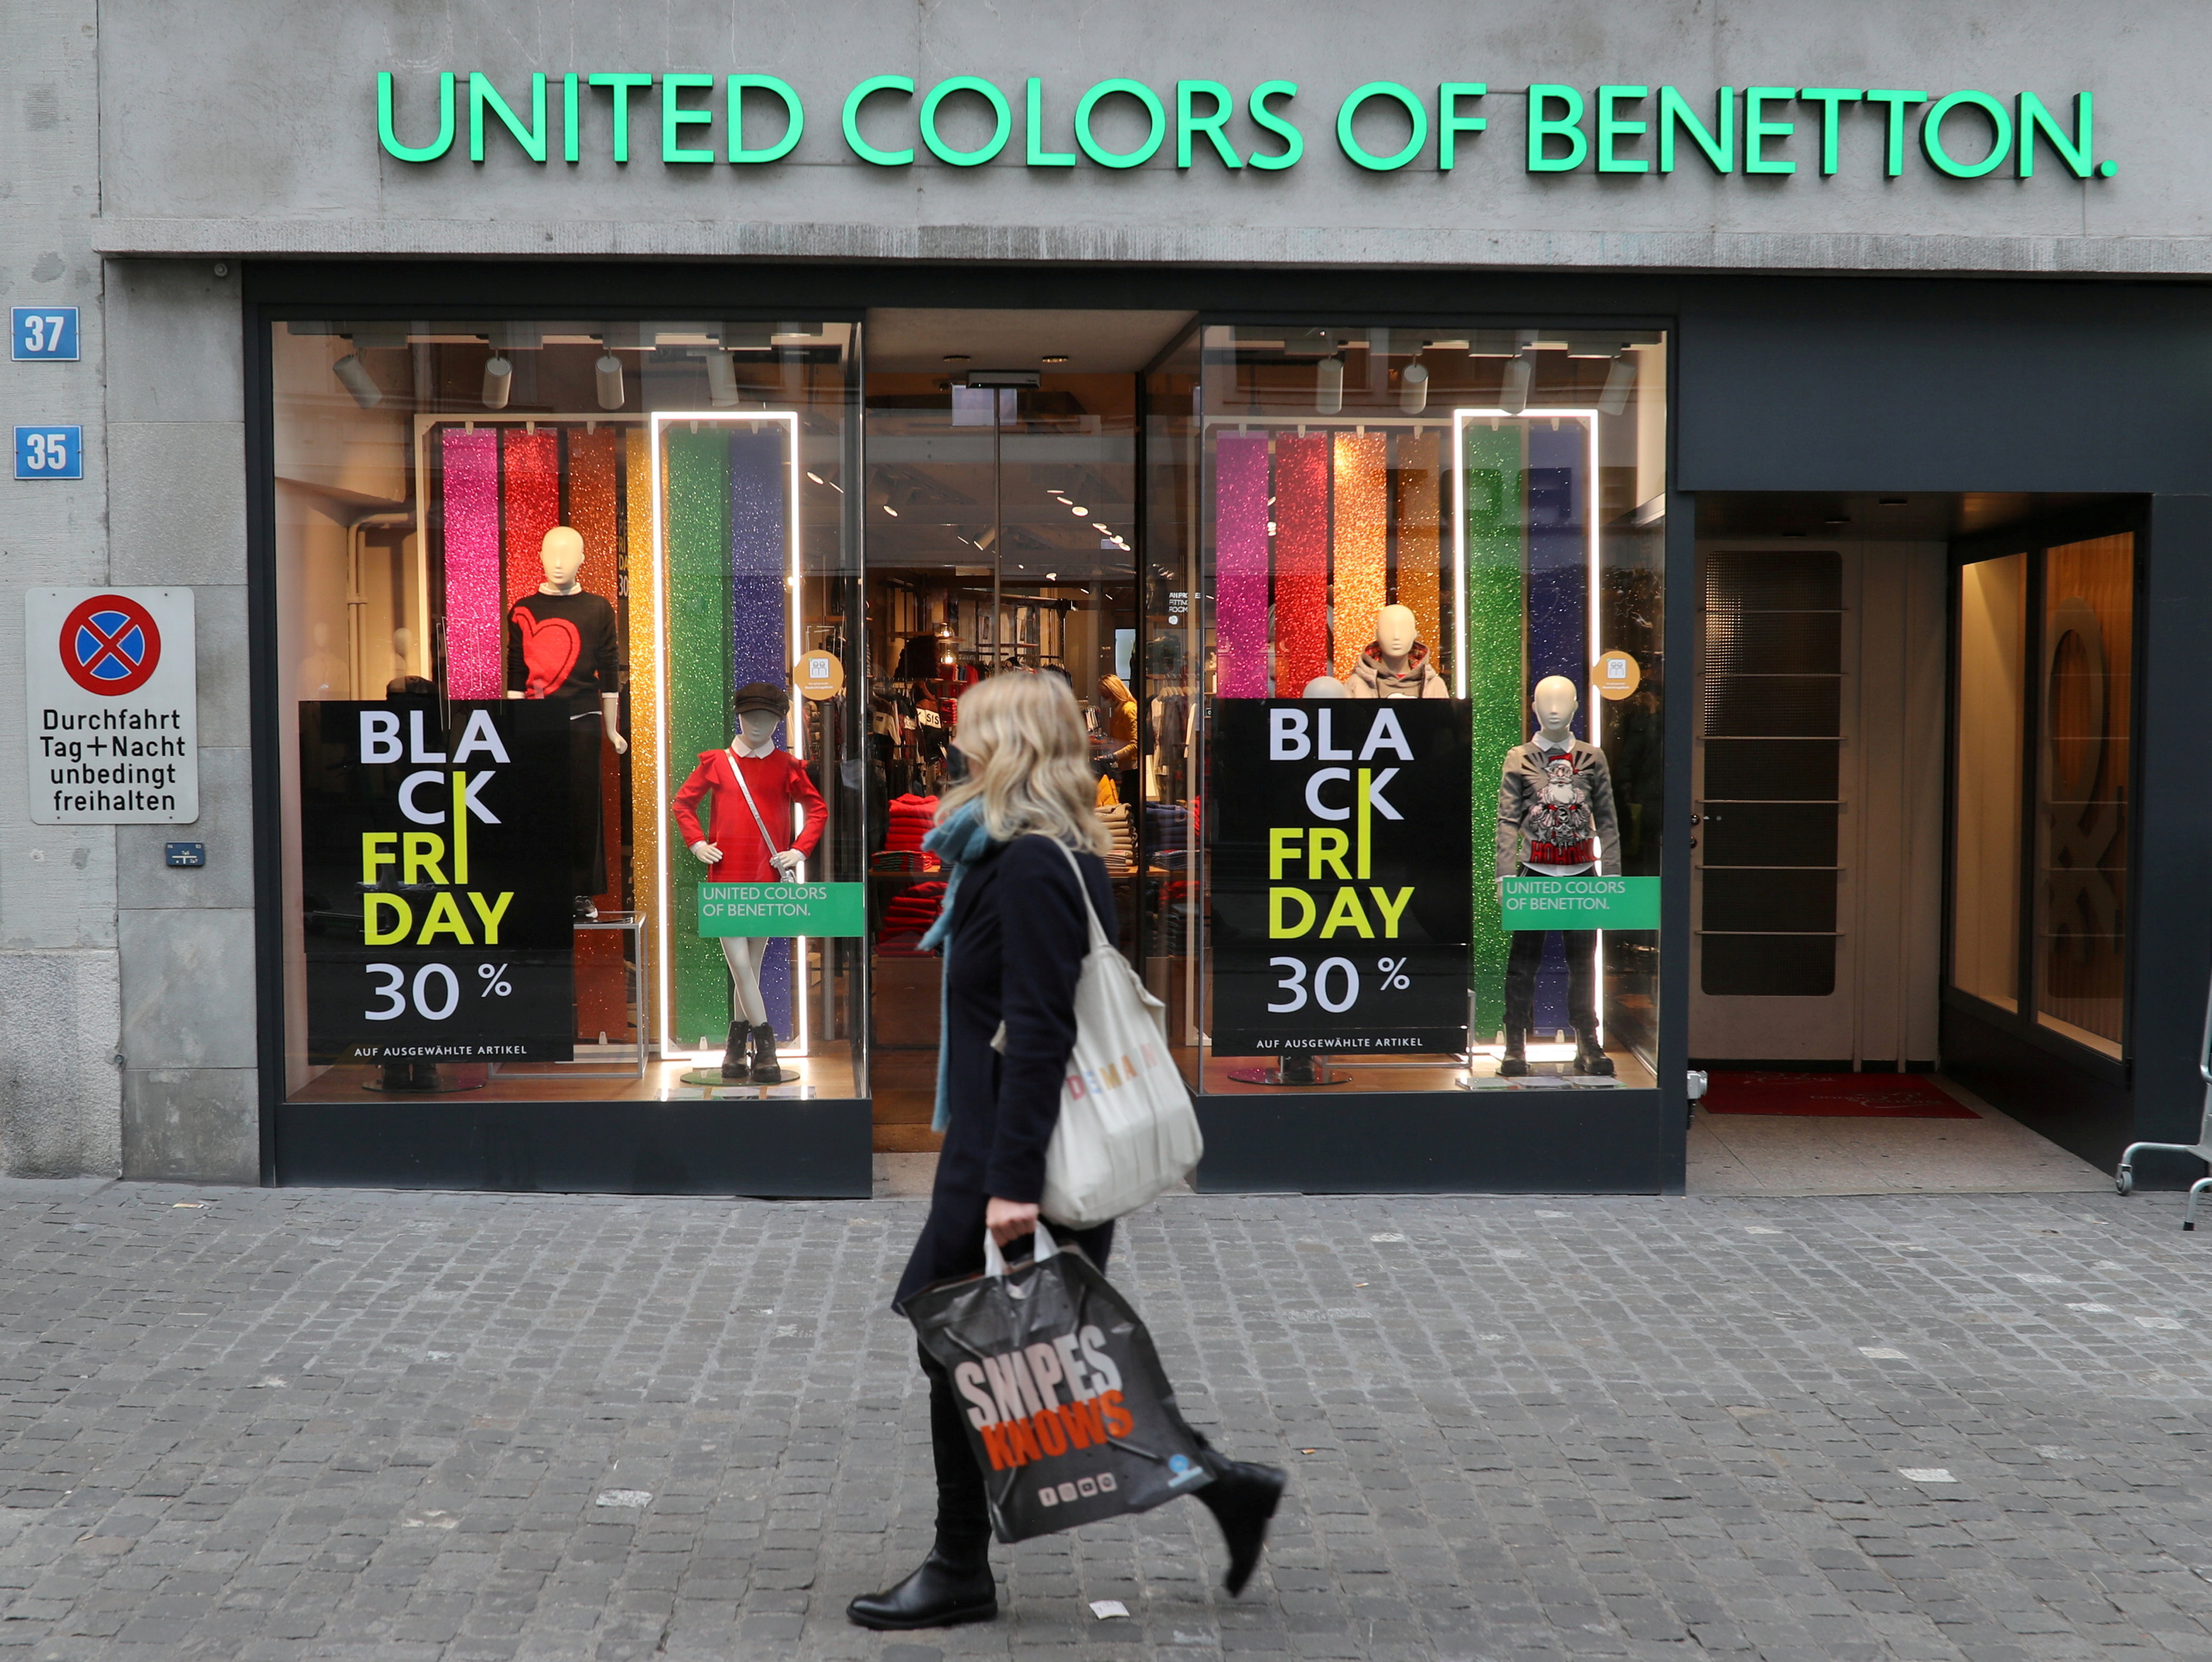 Posters offering special discount on Black Friday sales are seen in front of a United Colors of Benetton kid's fashion store in Zurich